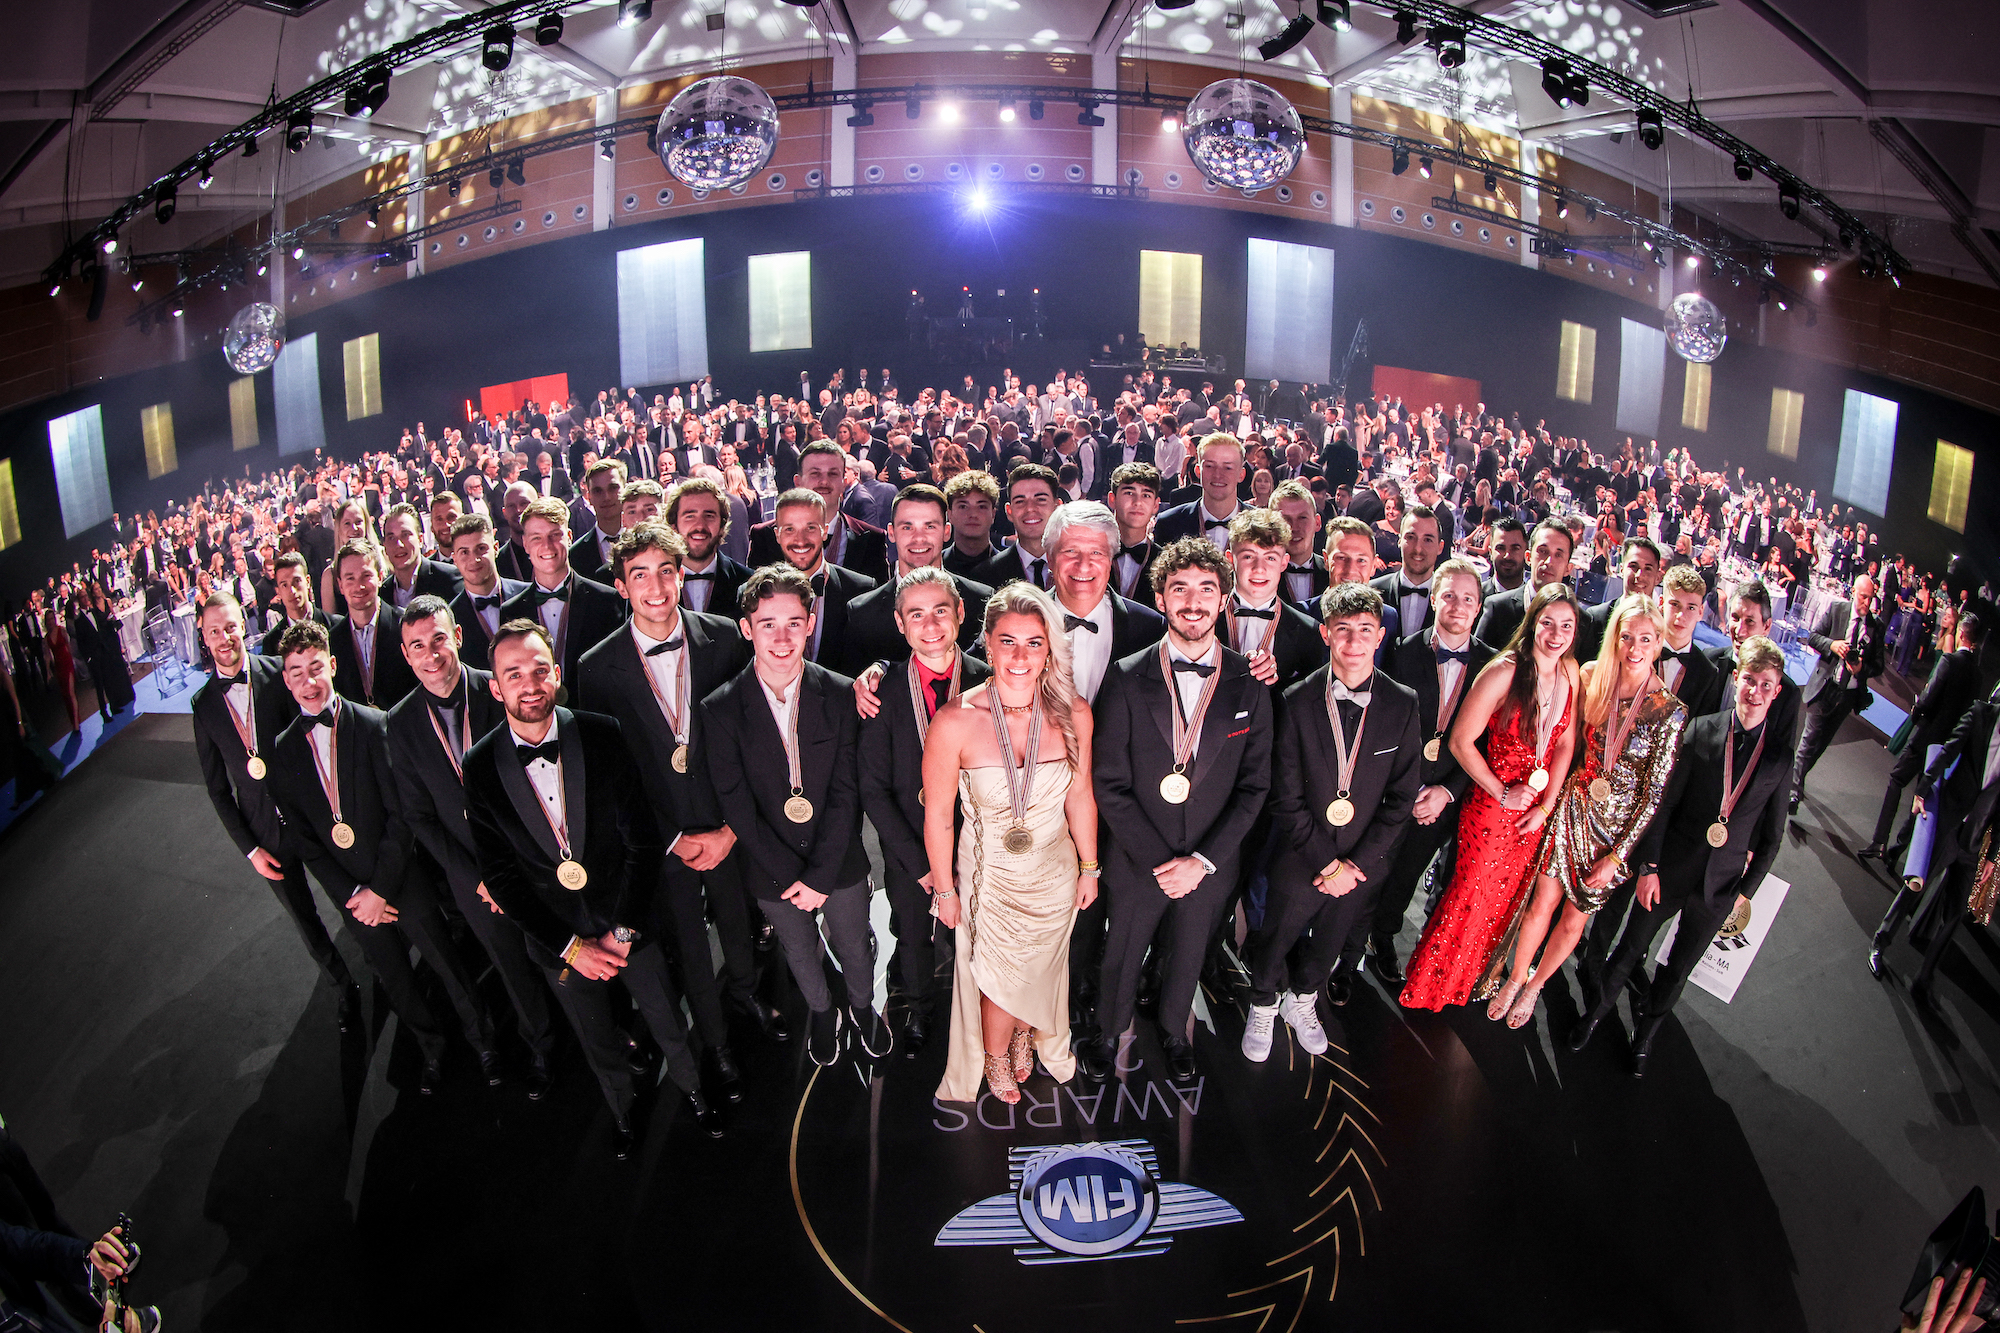 The KTM/FIM crowd at the Rimini Awards ceremony, where KTM received medals for MotoGP's Second Place. Media sourced from a KTM press release.